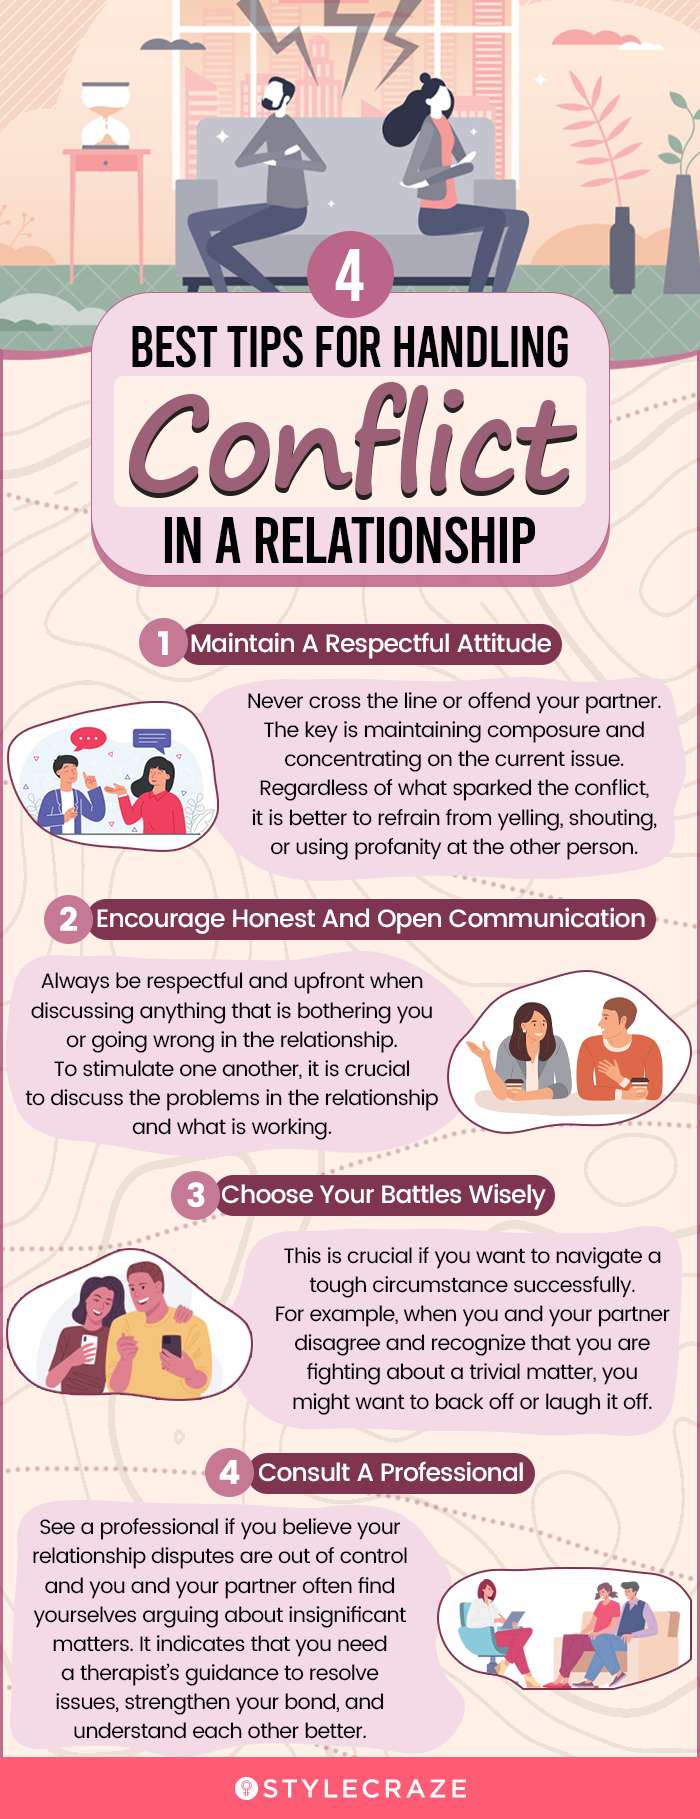 4 best tips for handling conflict in relationships (infographic)